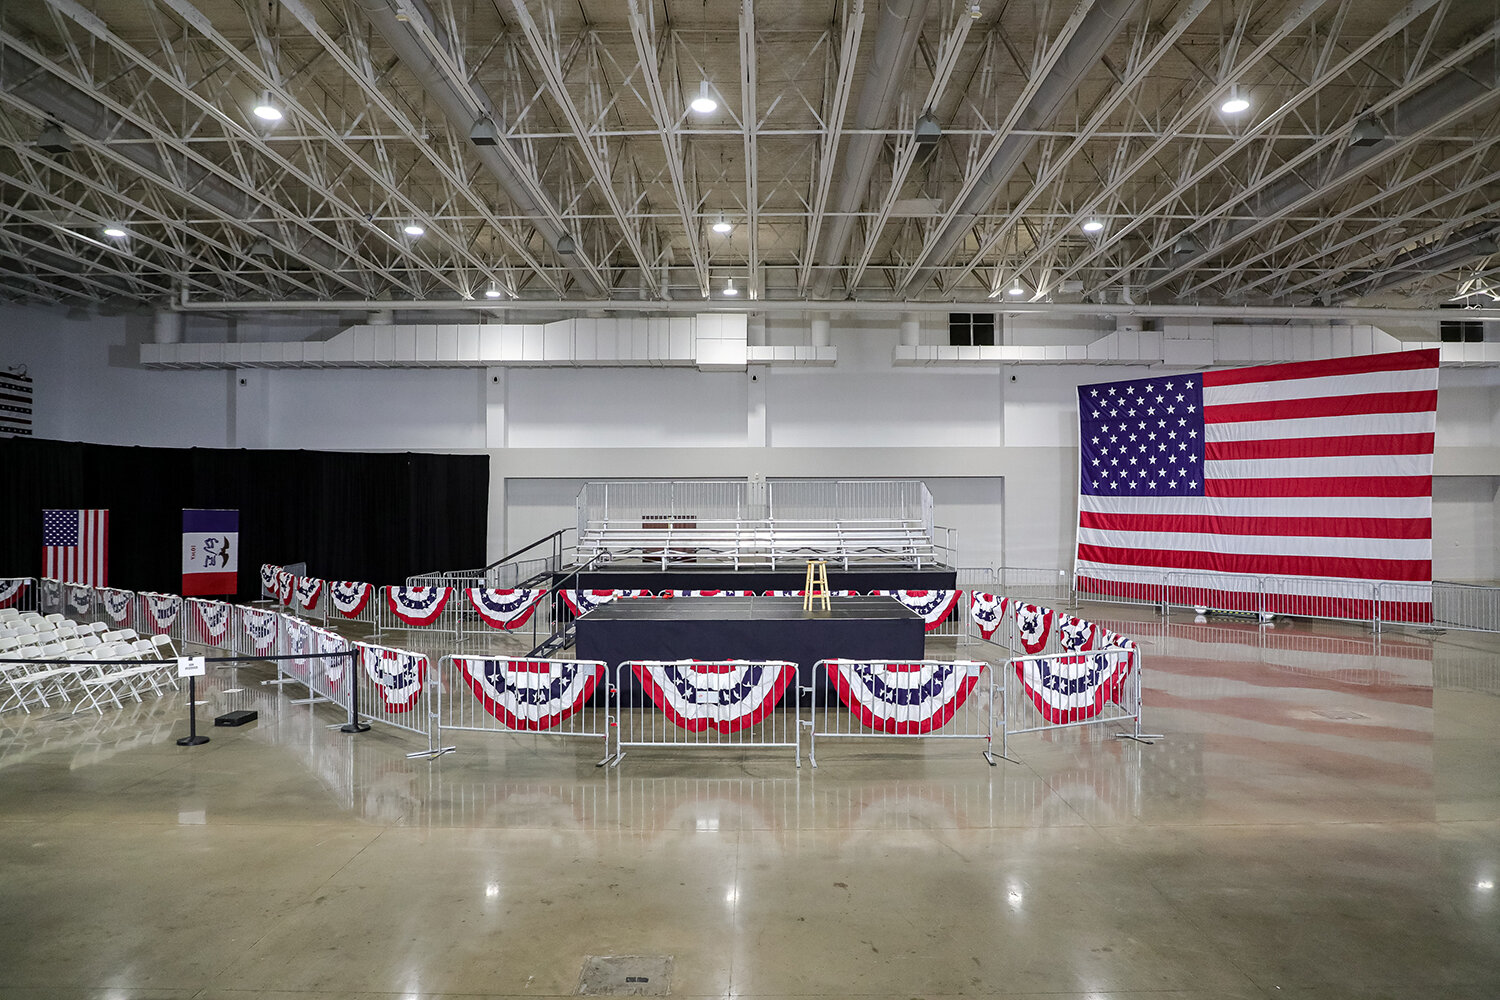  The stage area for Democratic presidential candidate Pete Buttigieg before a campaign rally in Coralville, IA on Sunday, Dec. 8, 2019.  